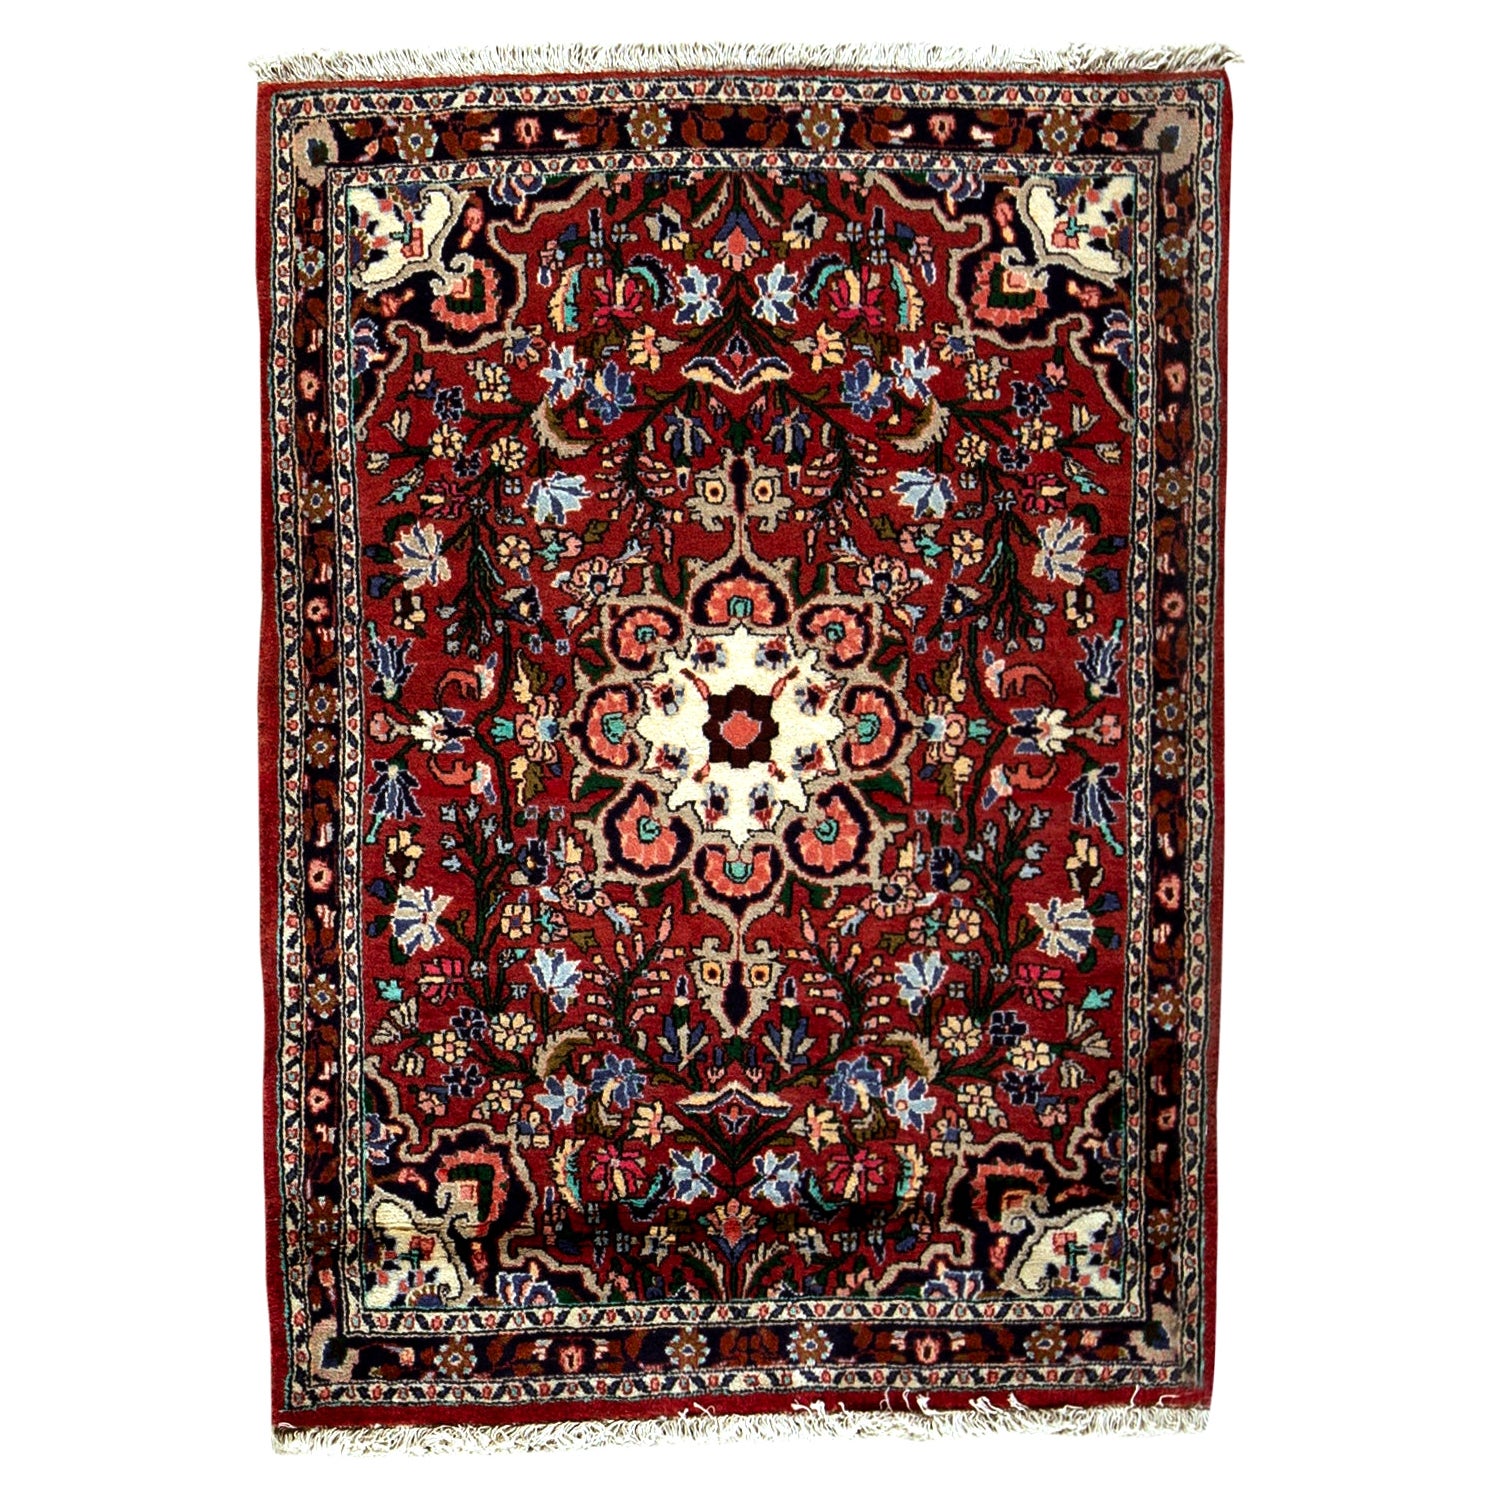   Antique Persian Fine Traditional Handwoven Luxury Wool Red / Navy Rug